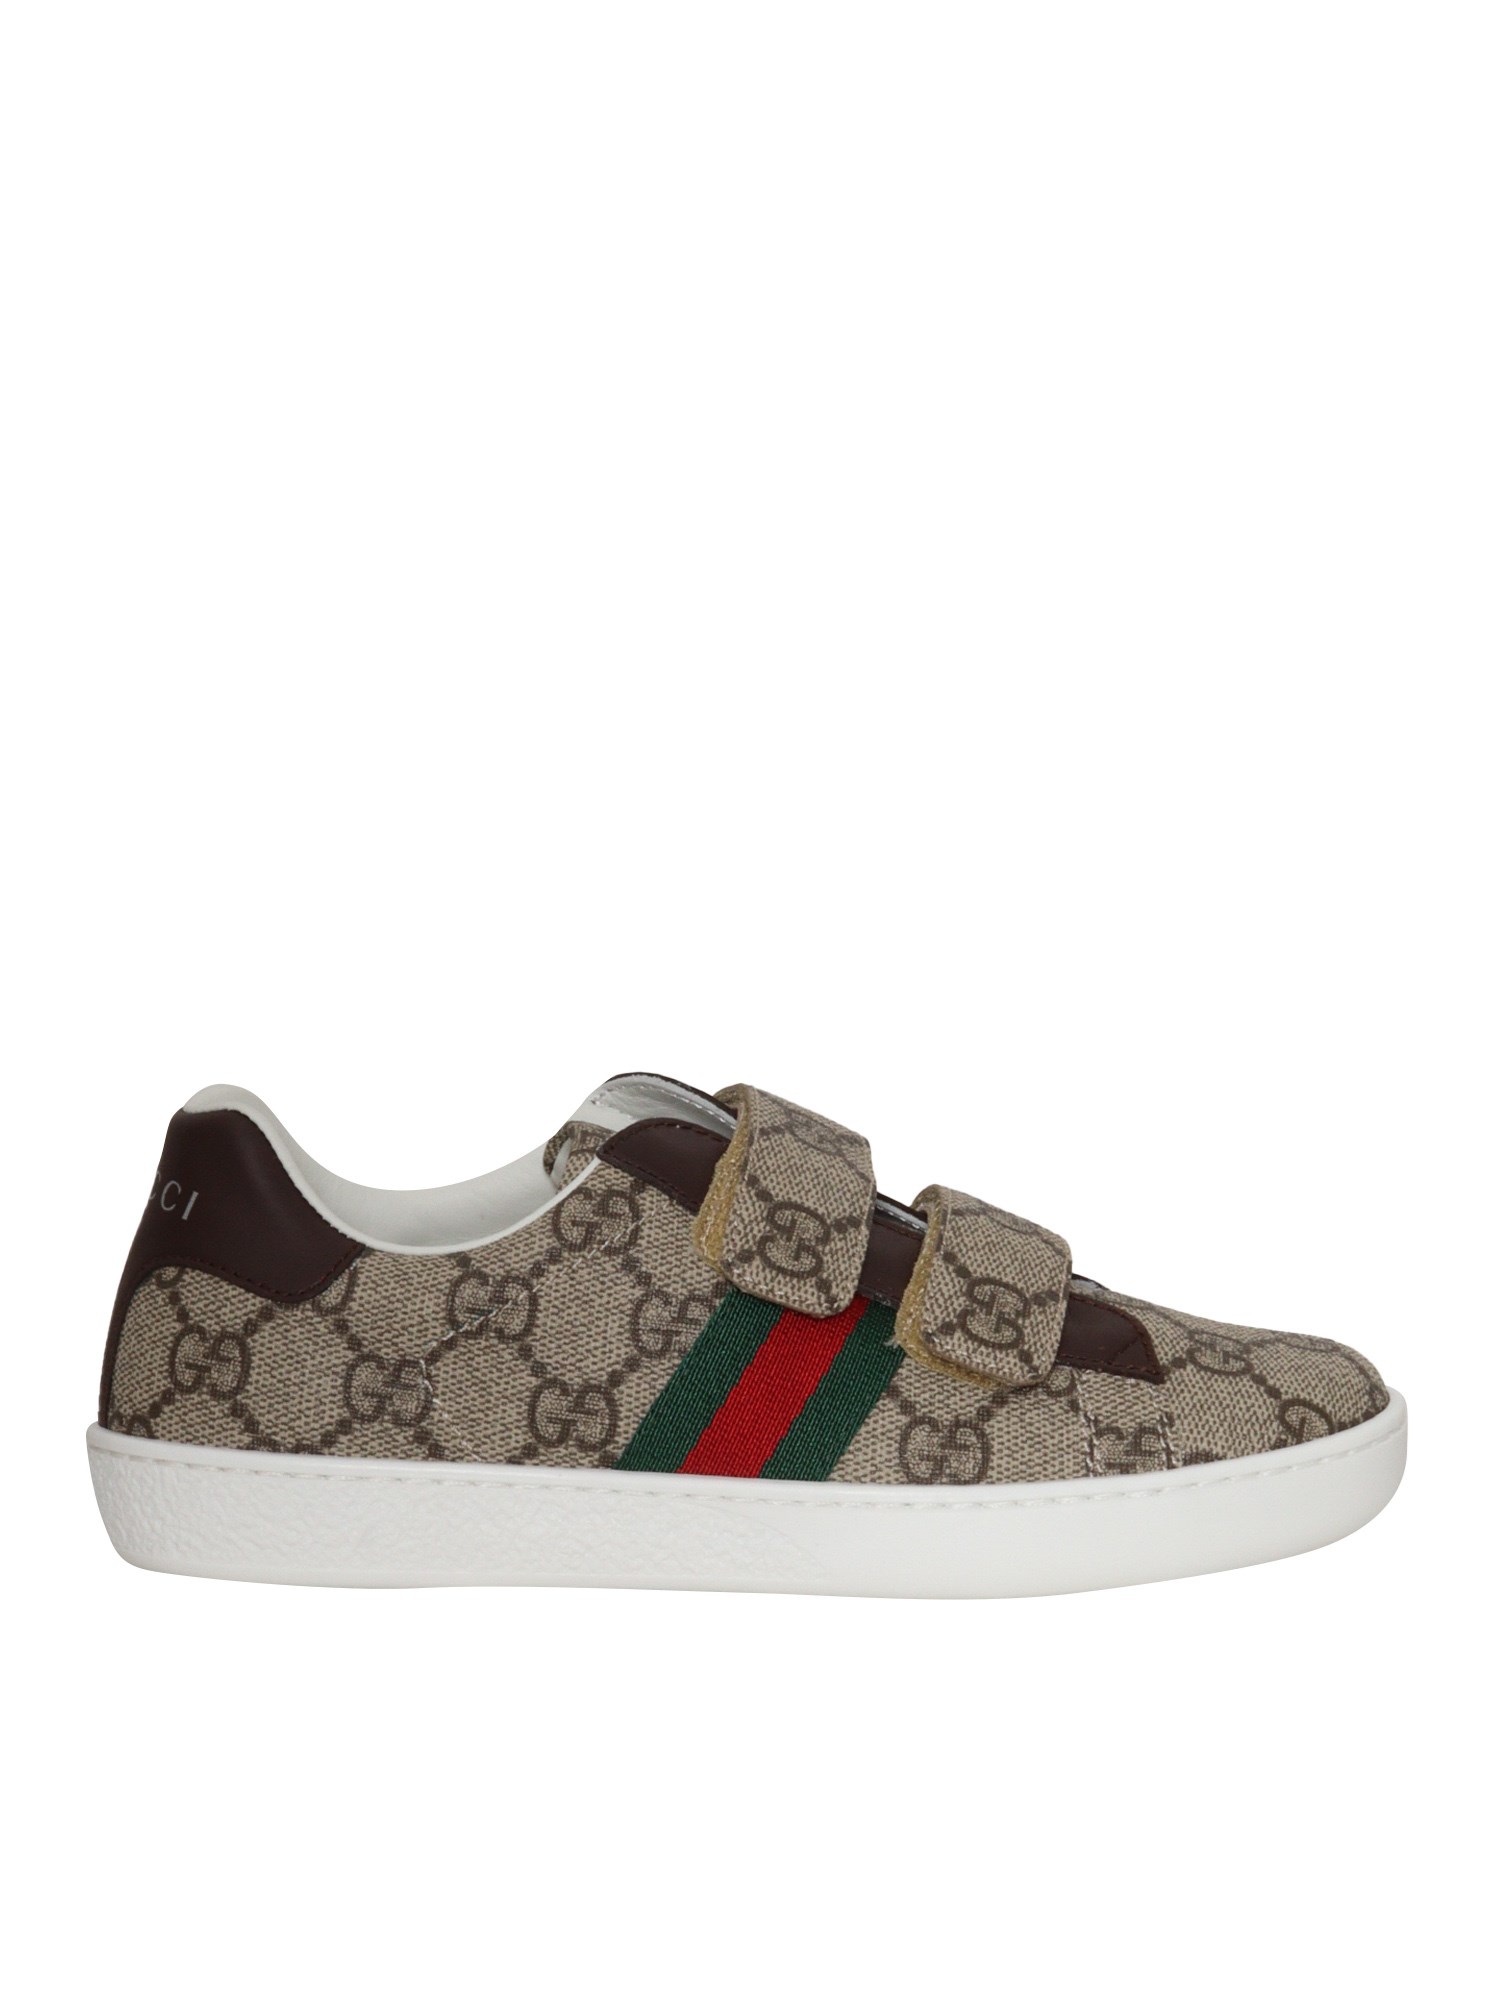 Gucci Gg Sneakers With Tears In Multi